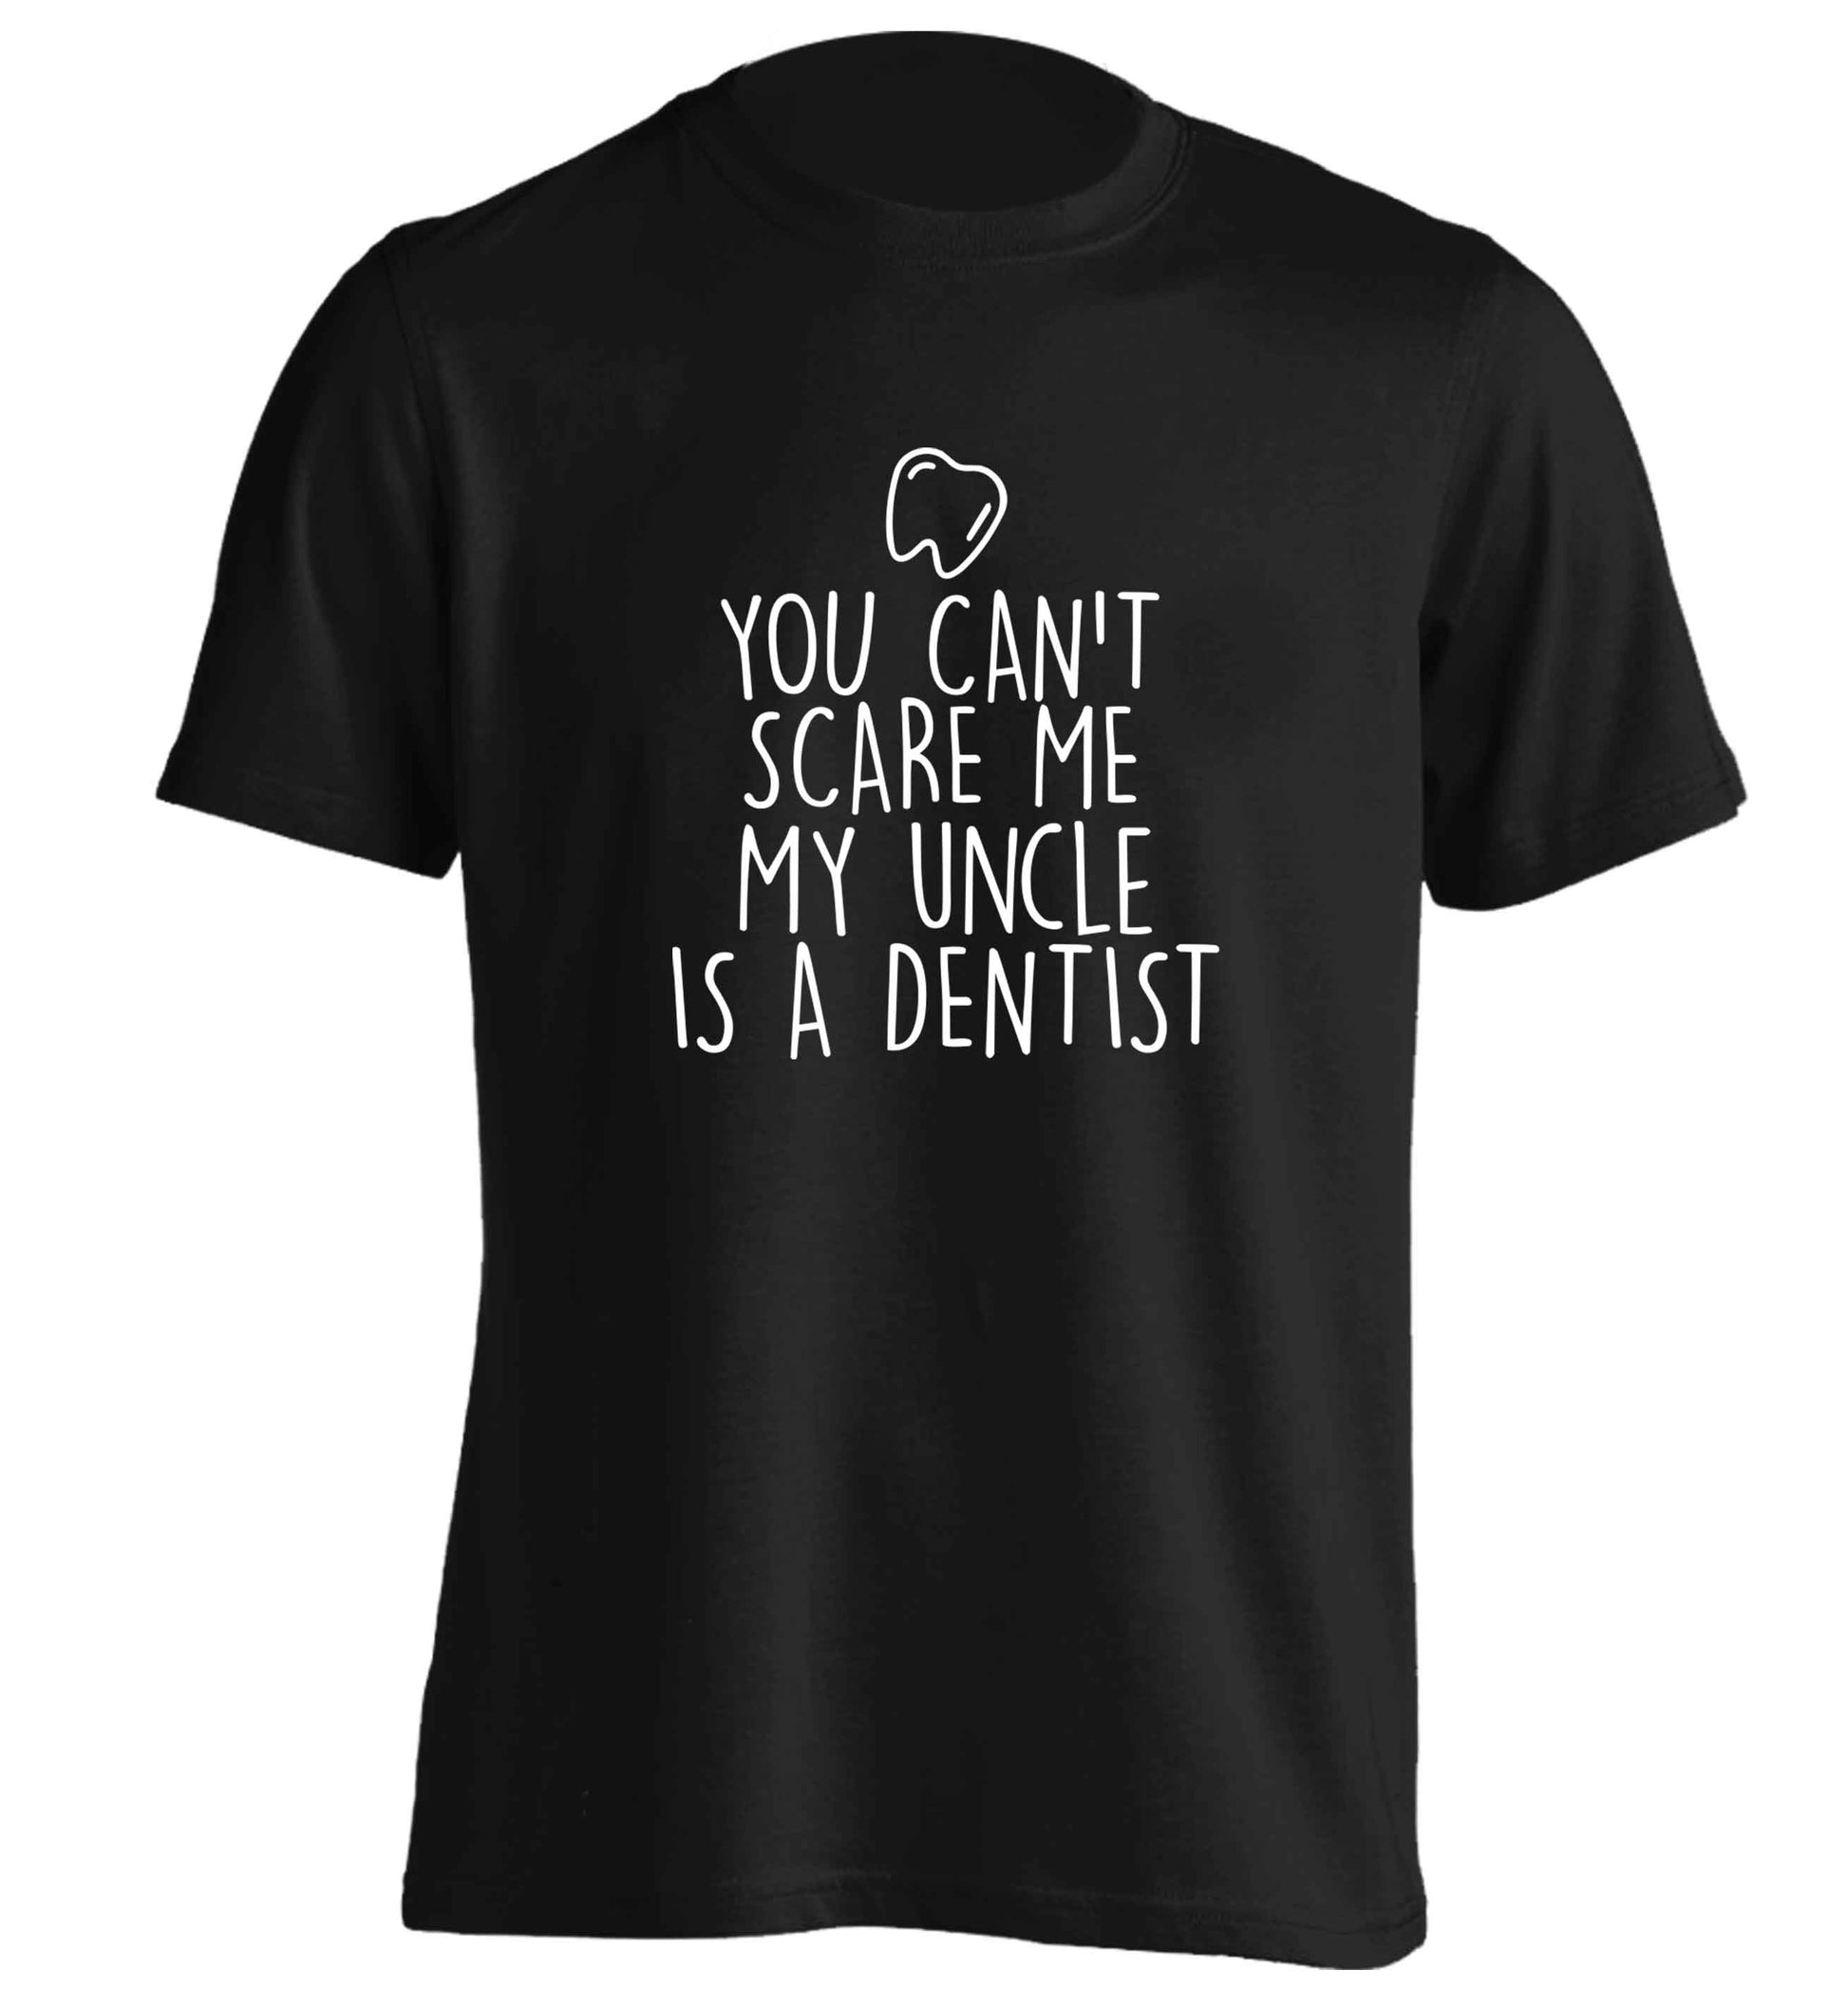 You can't scare me my uncle is a dentist adults unisex black Tshirt 2XL